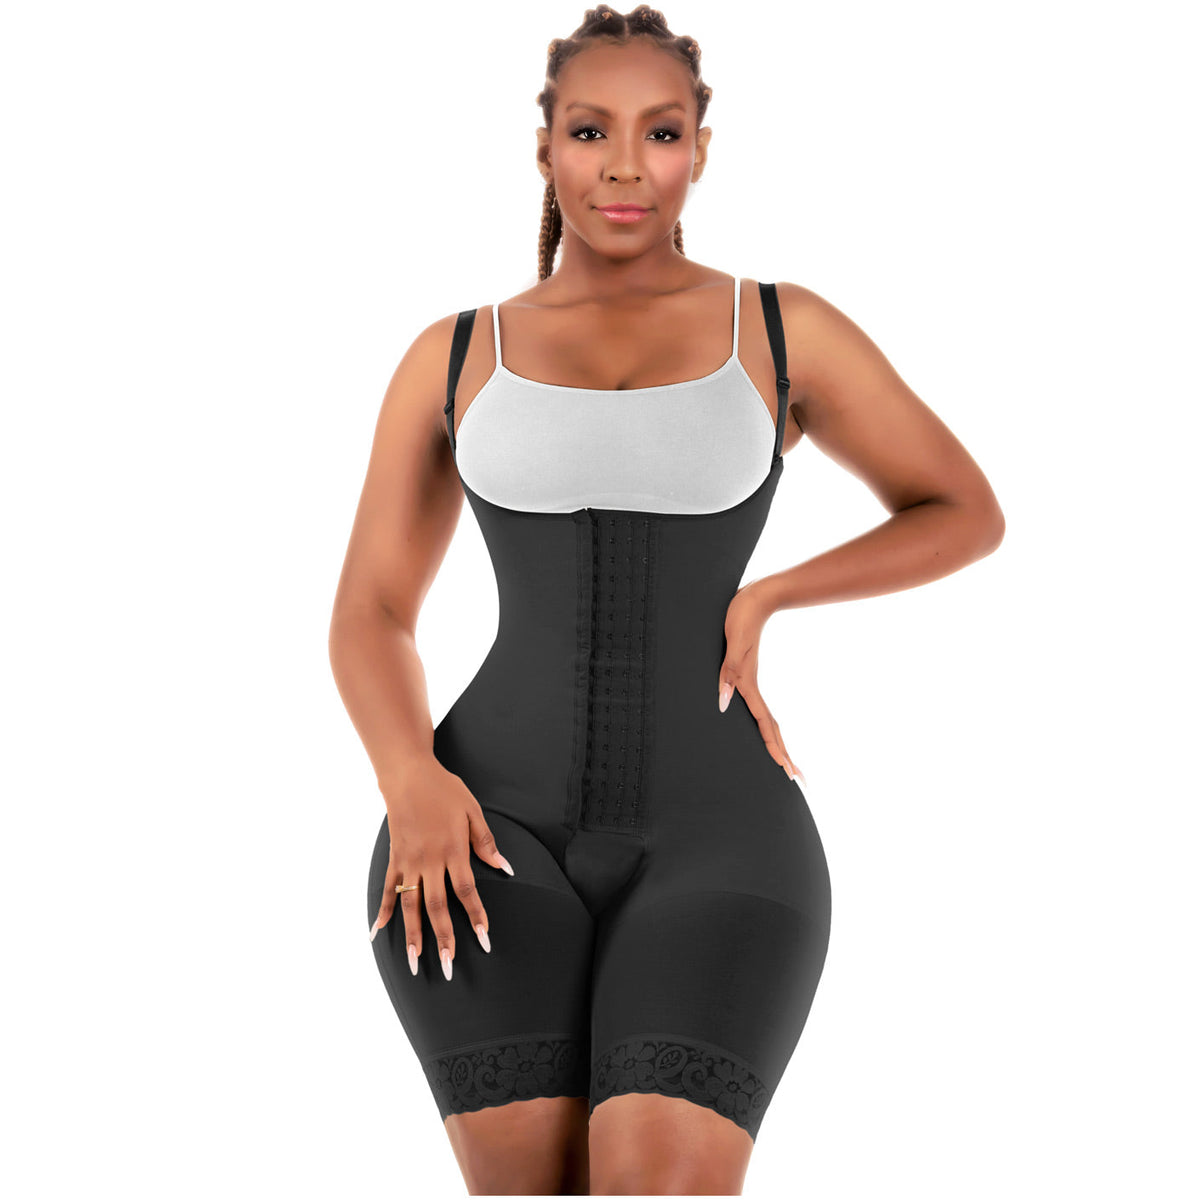 Bling Shapers 573BF | Tummy Control Shapewear | Butt Lifter Thigh slimming Body Shaper